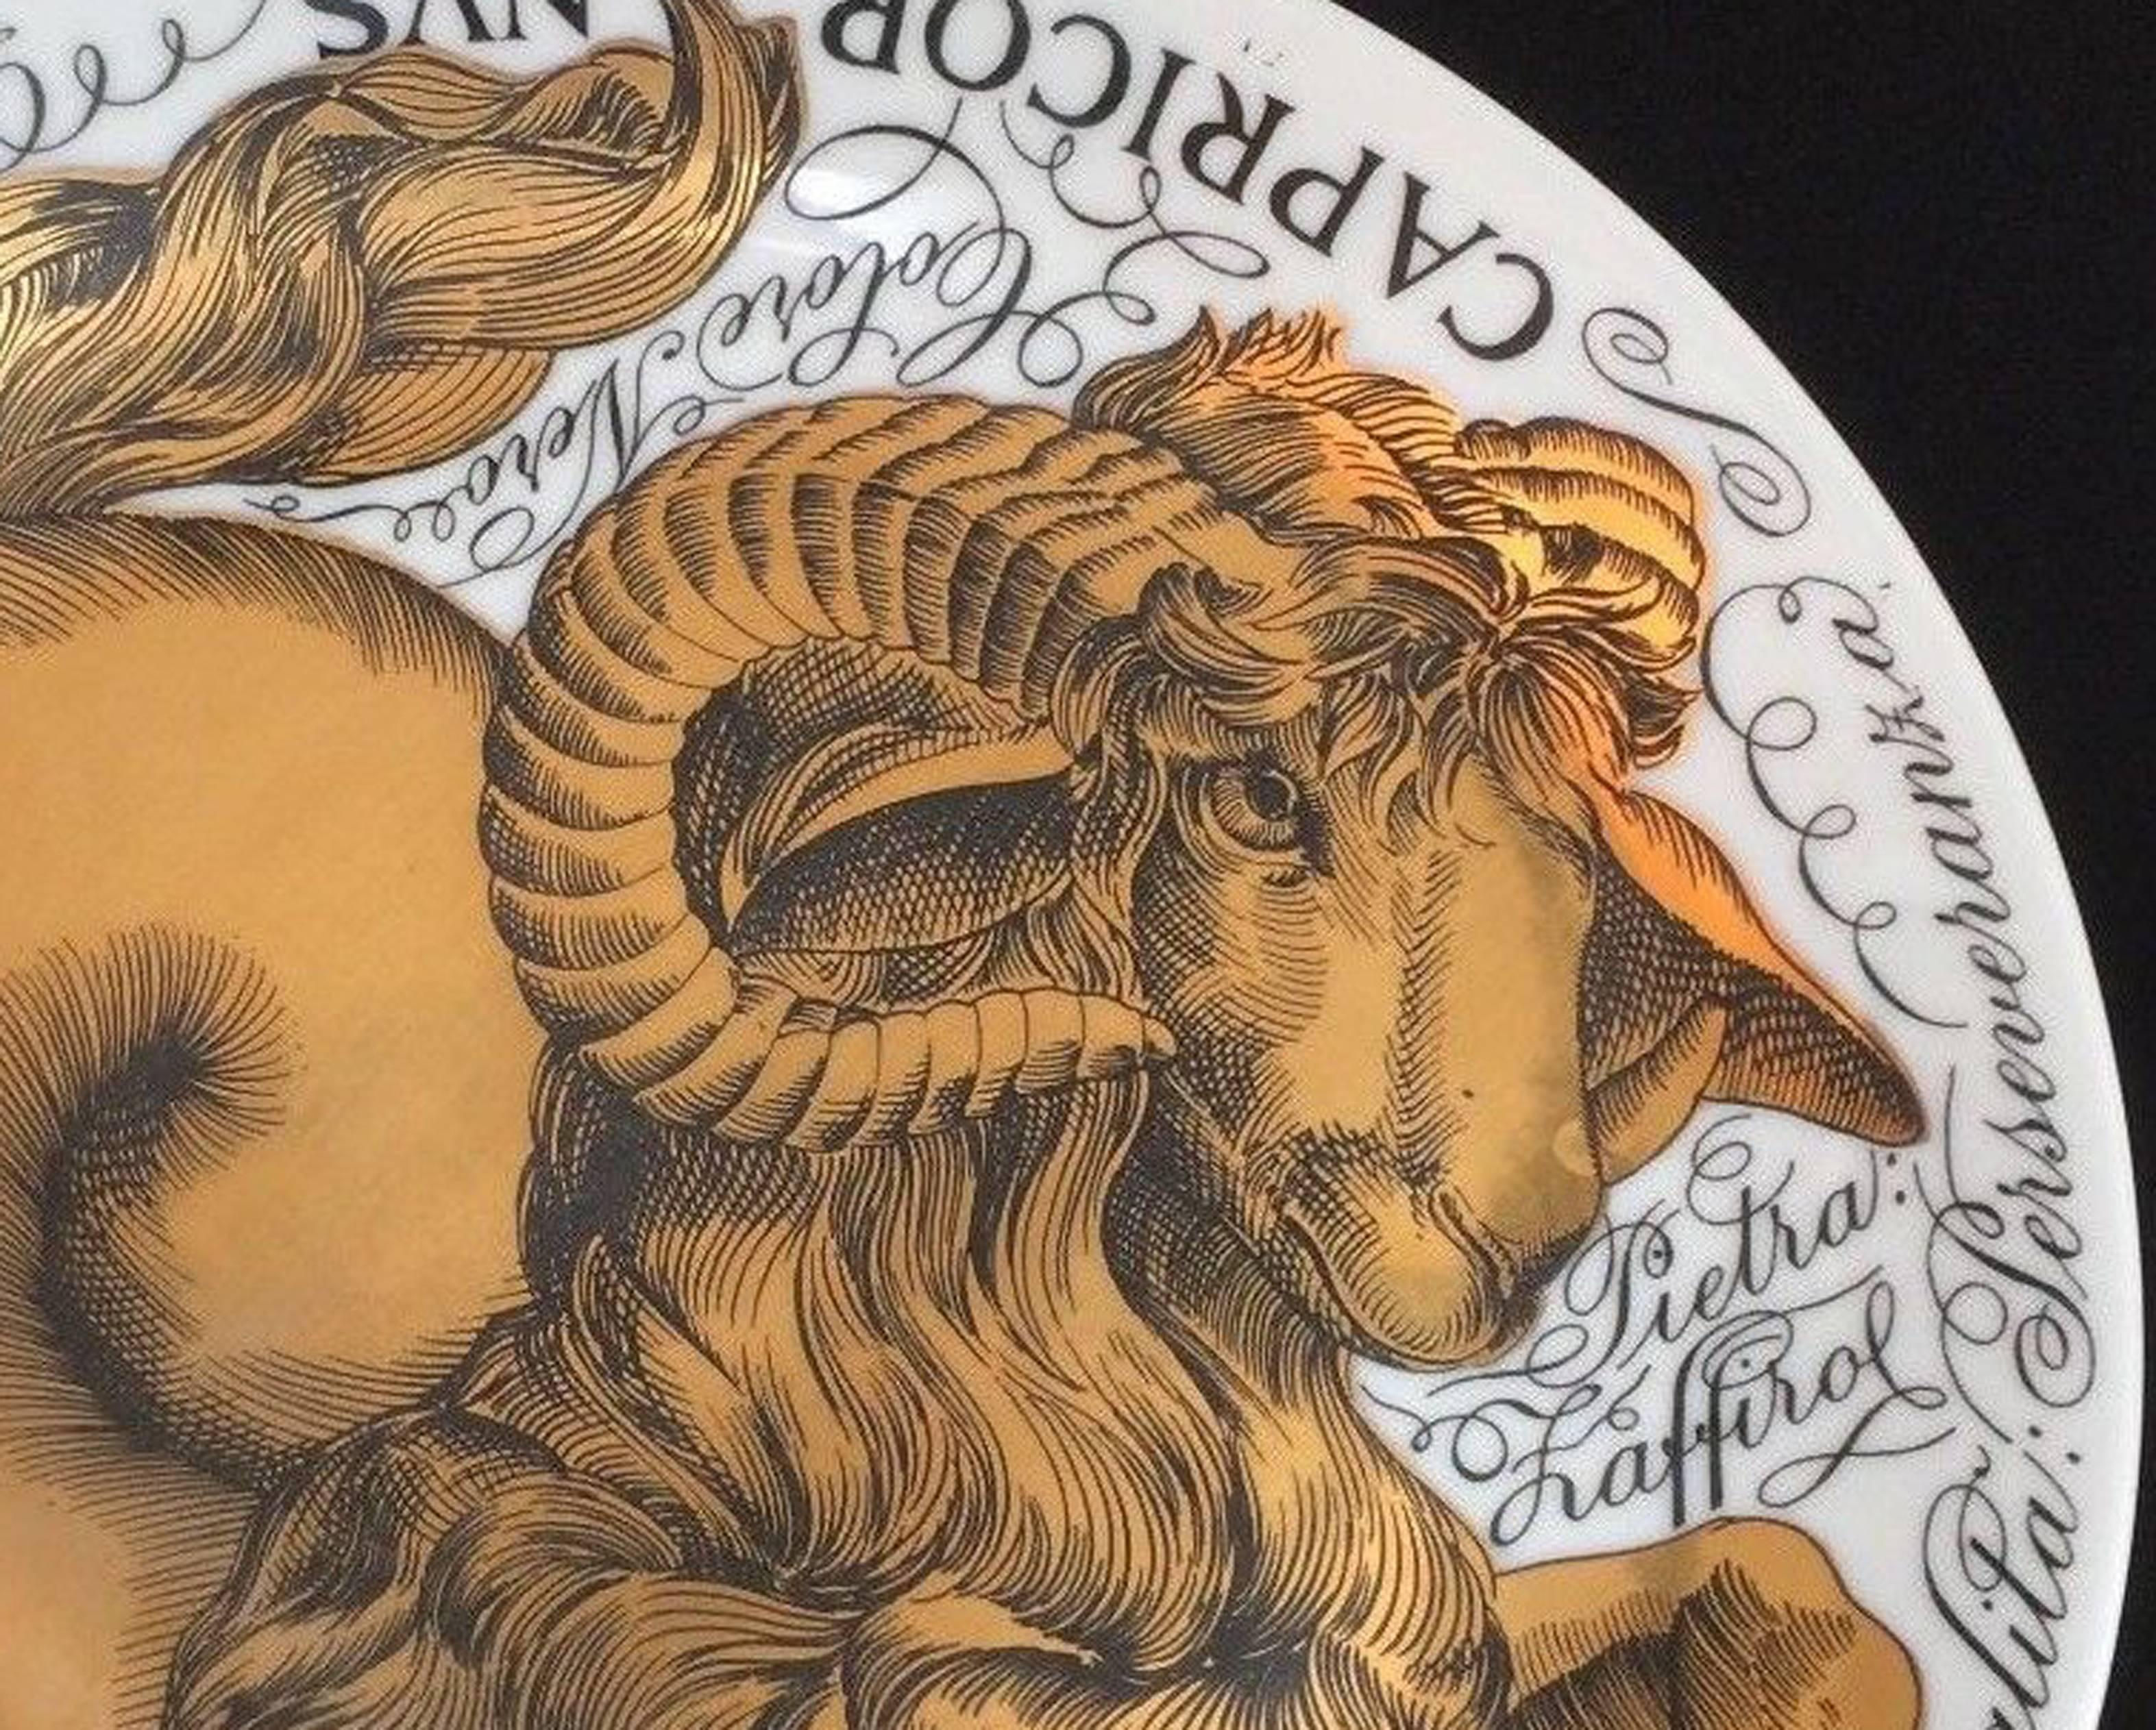 Vintage Piero Fornasetti Porcelain Zodiac plate,
Astrali pattern,
Capricorn,
Made for Corisia, dated 1964; number 1.

The plate in black and gold depicts the astrological sign CAPRICORN with words intertwined around the form of the ram with